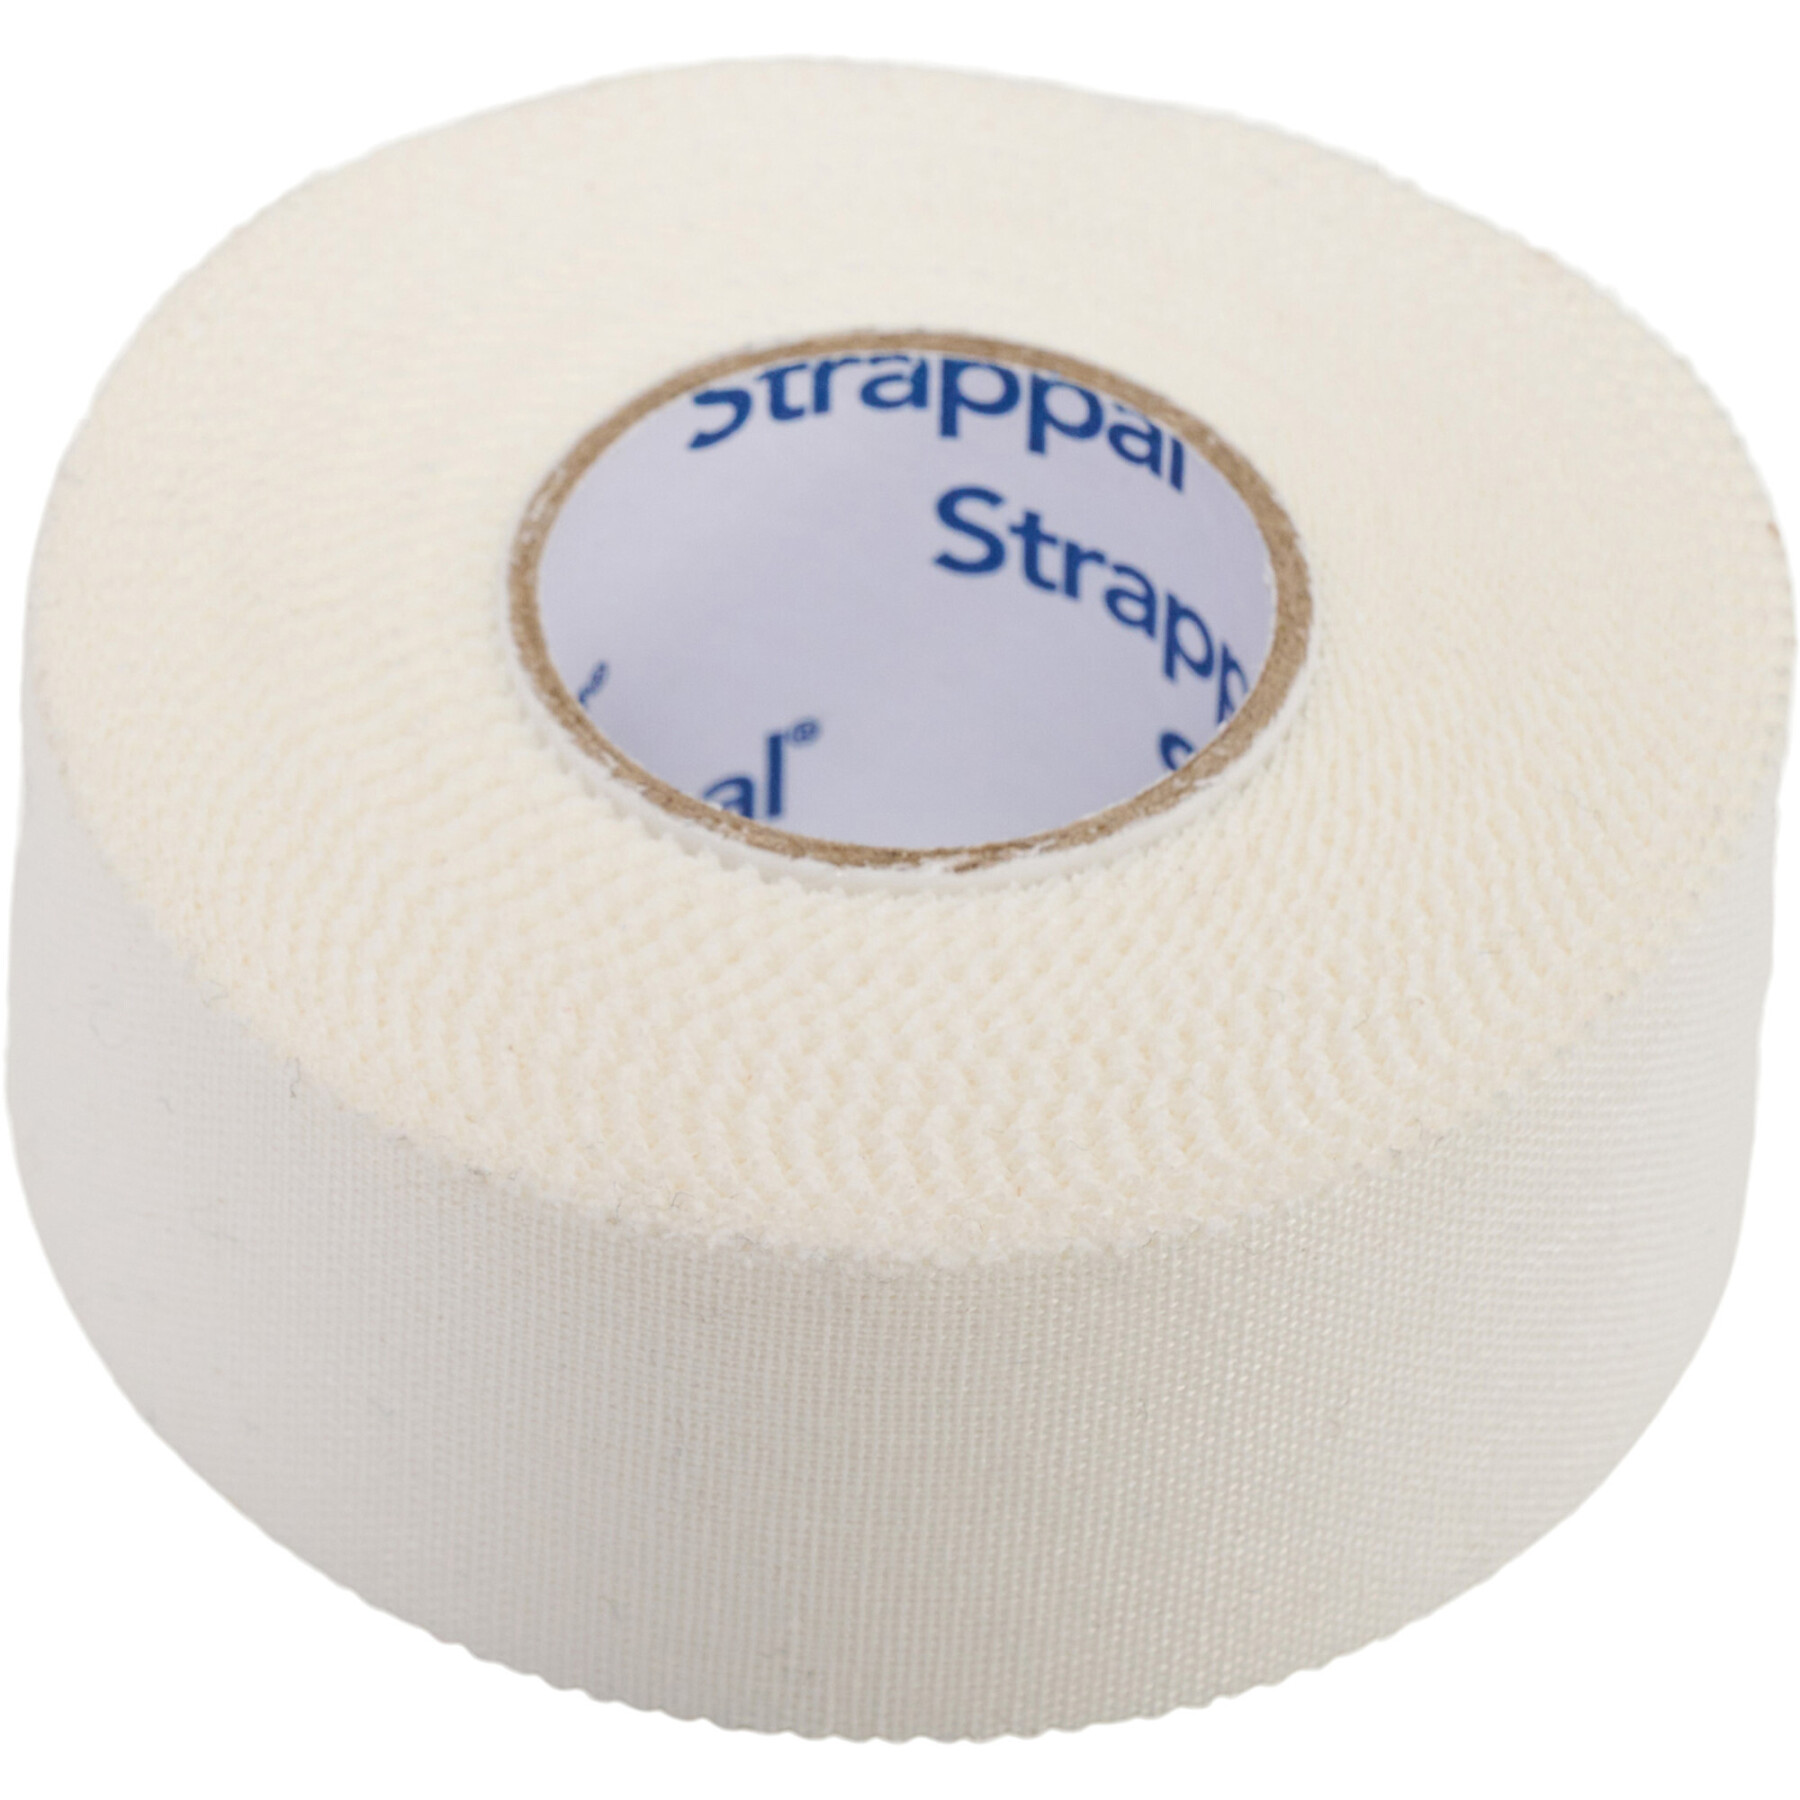 24er Pack strappal tape Select 4cm x 10m